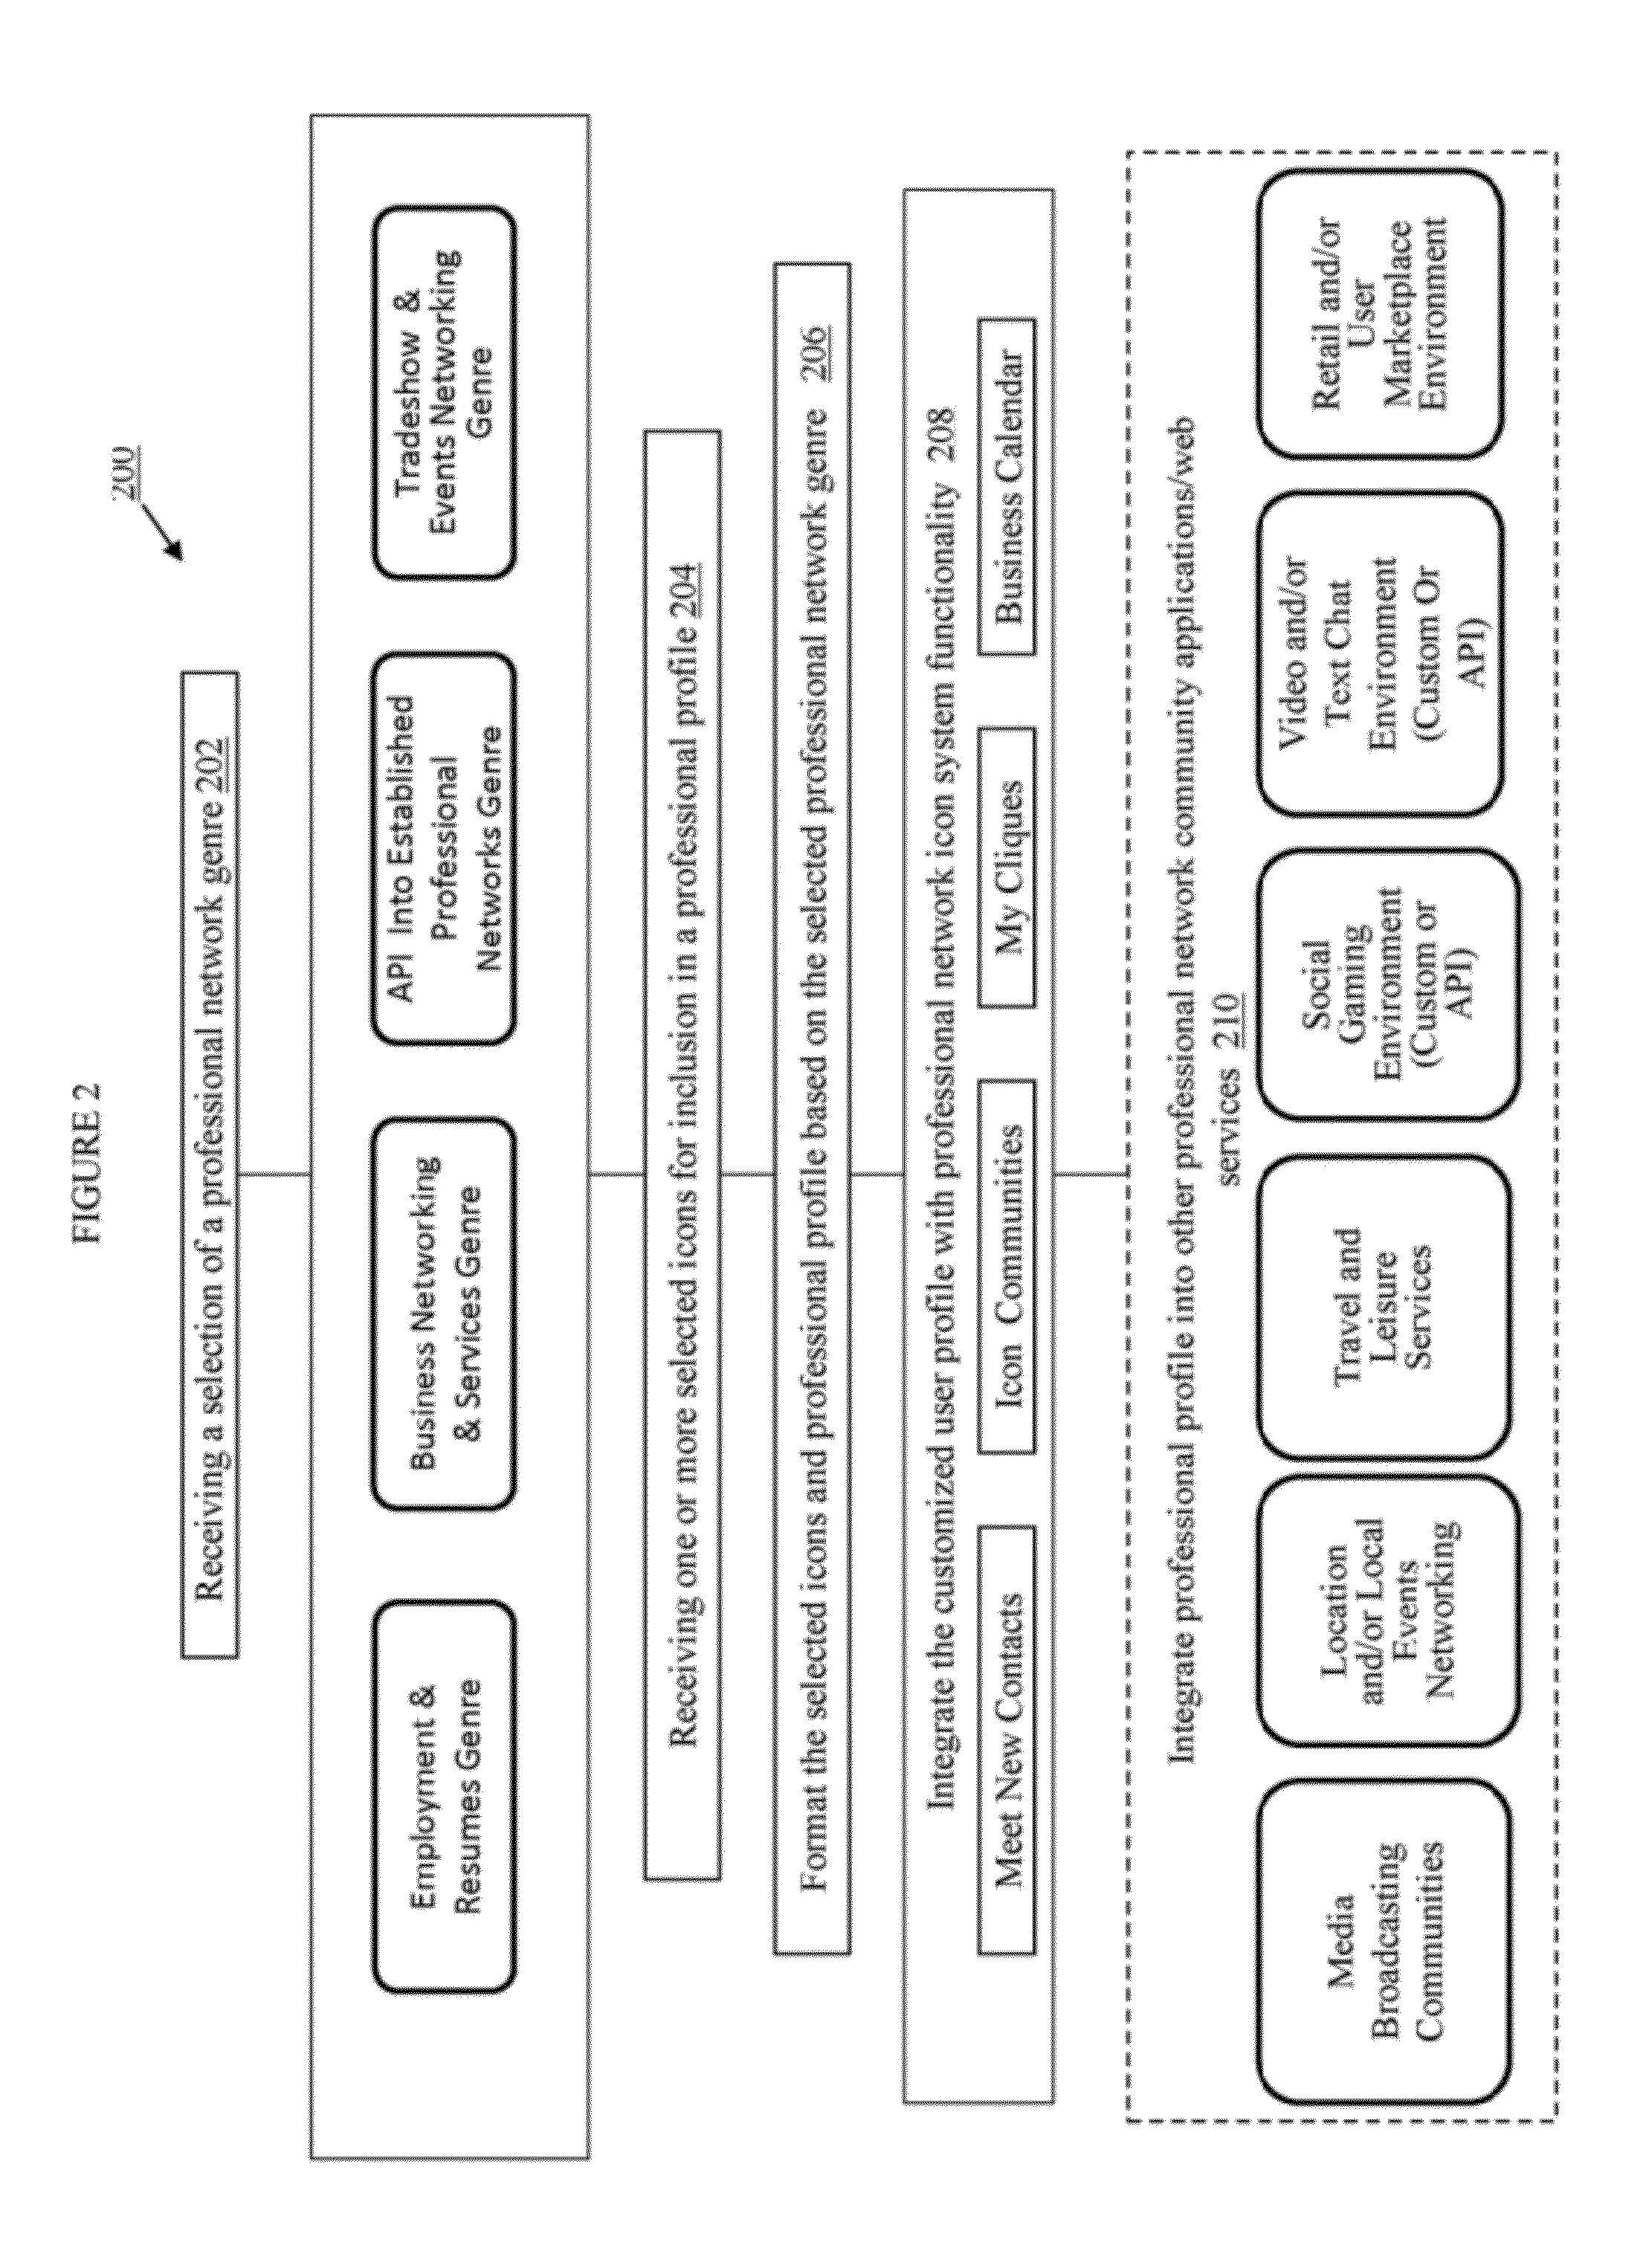 System and method for an interactive mobile-optimized icon-based professional profile display and associated search, matching and social network